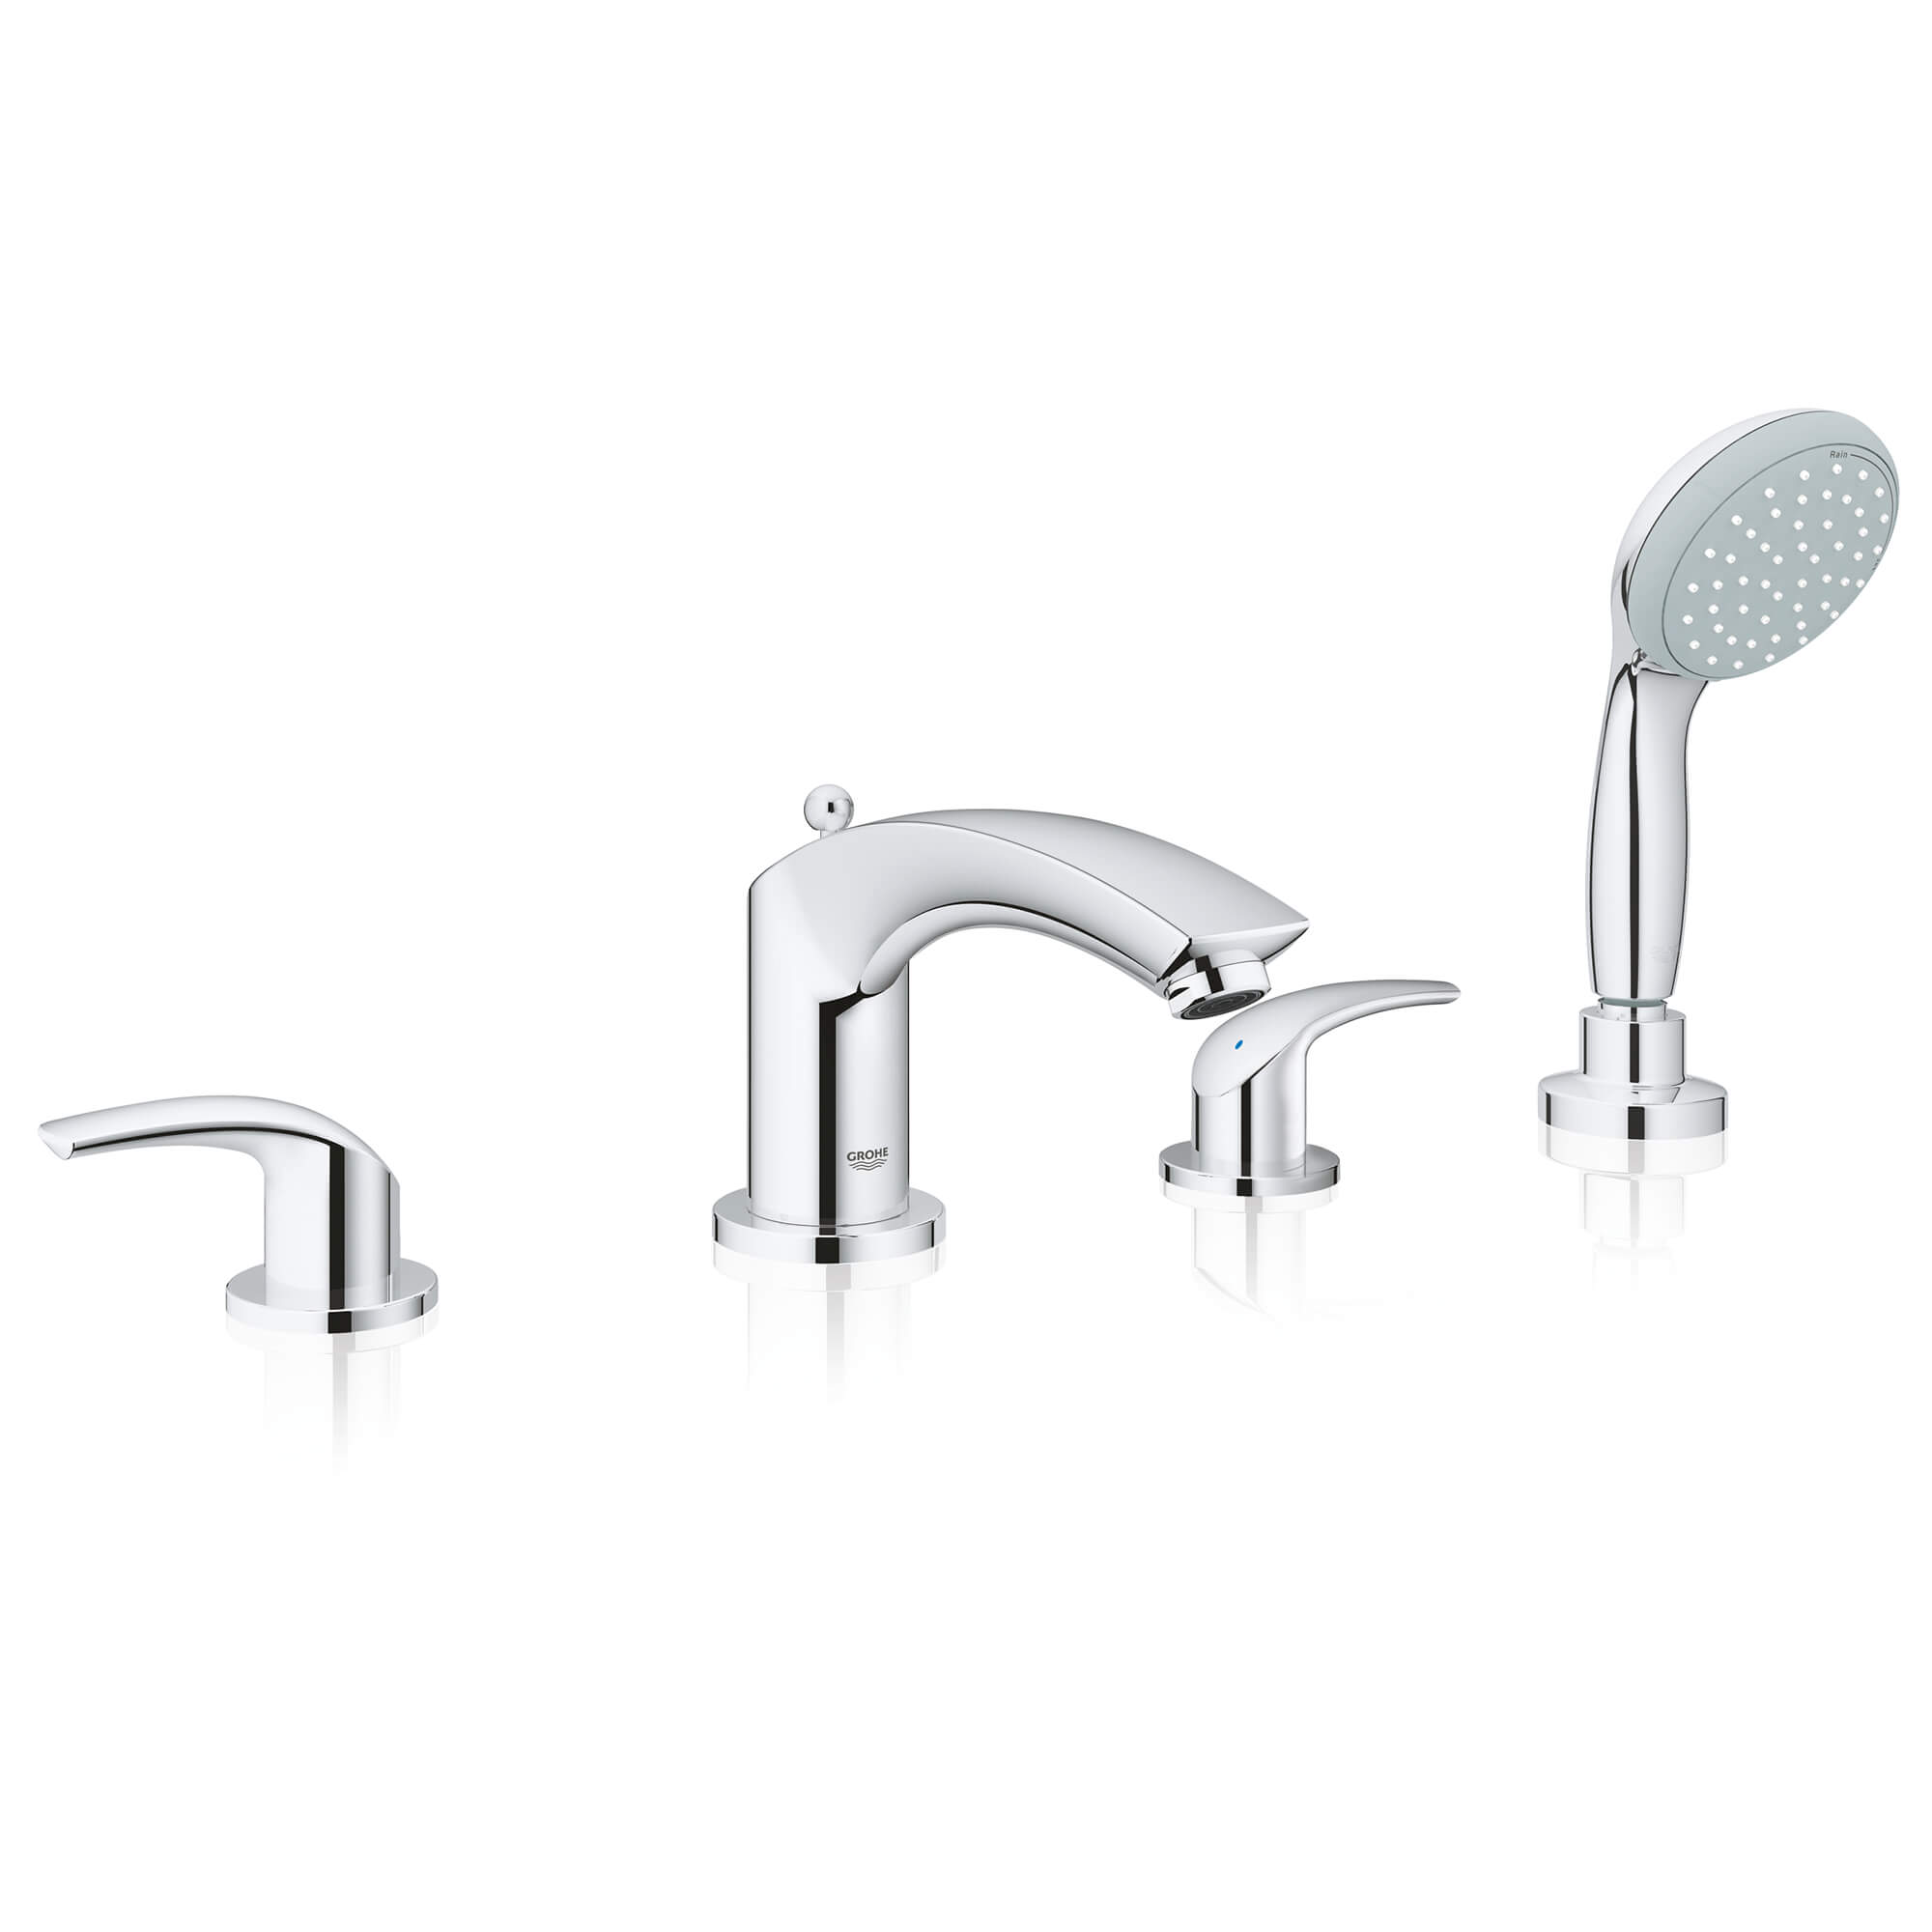 4-Hole 2-Handle Deck Mount Roman Tub Faucet with 1.75 GPM Hand Shower